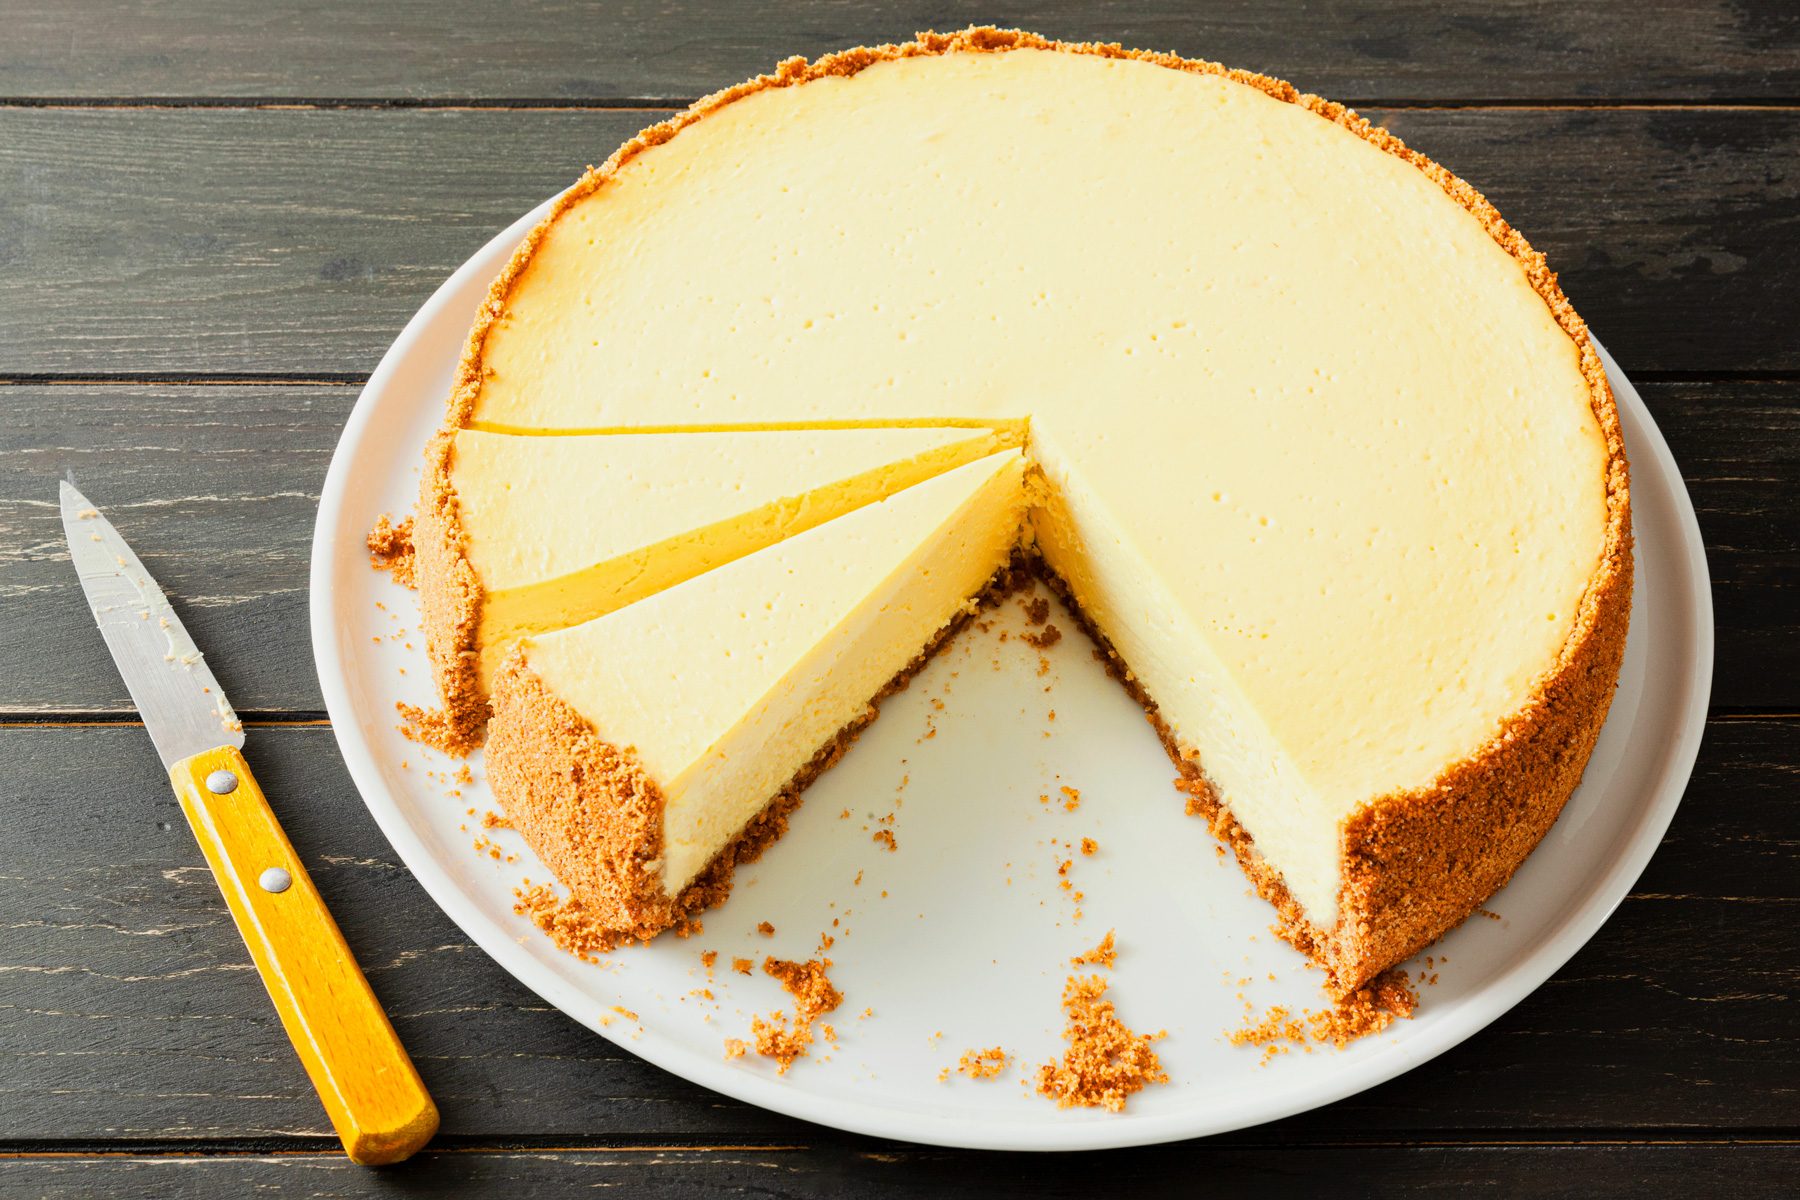 A plate of Lemon Dream Cheesecake with a knife on a wooden table